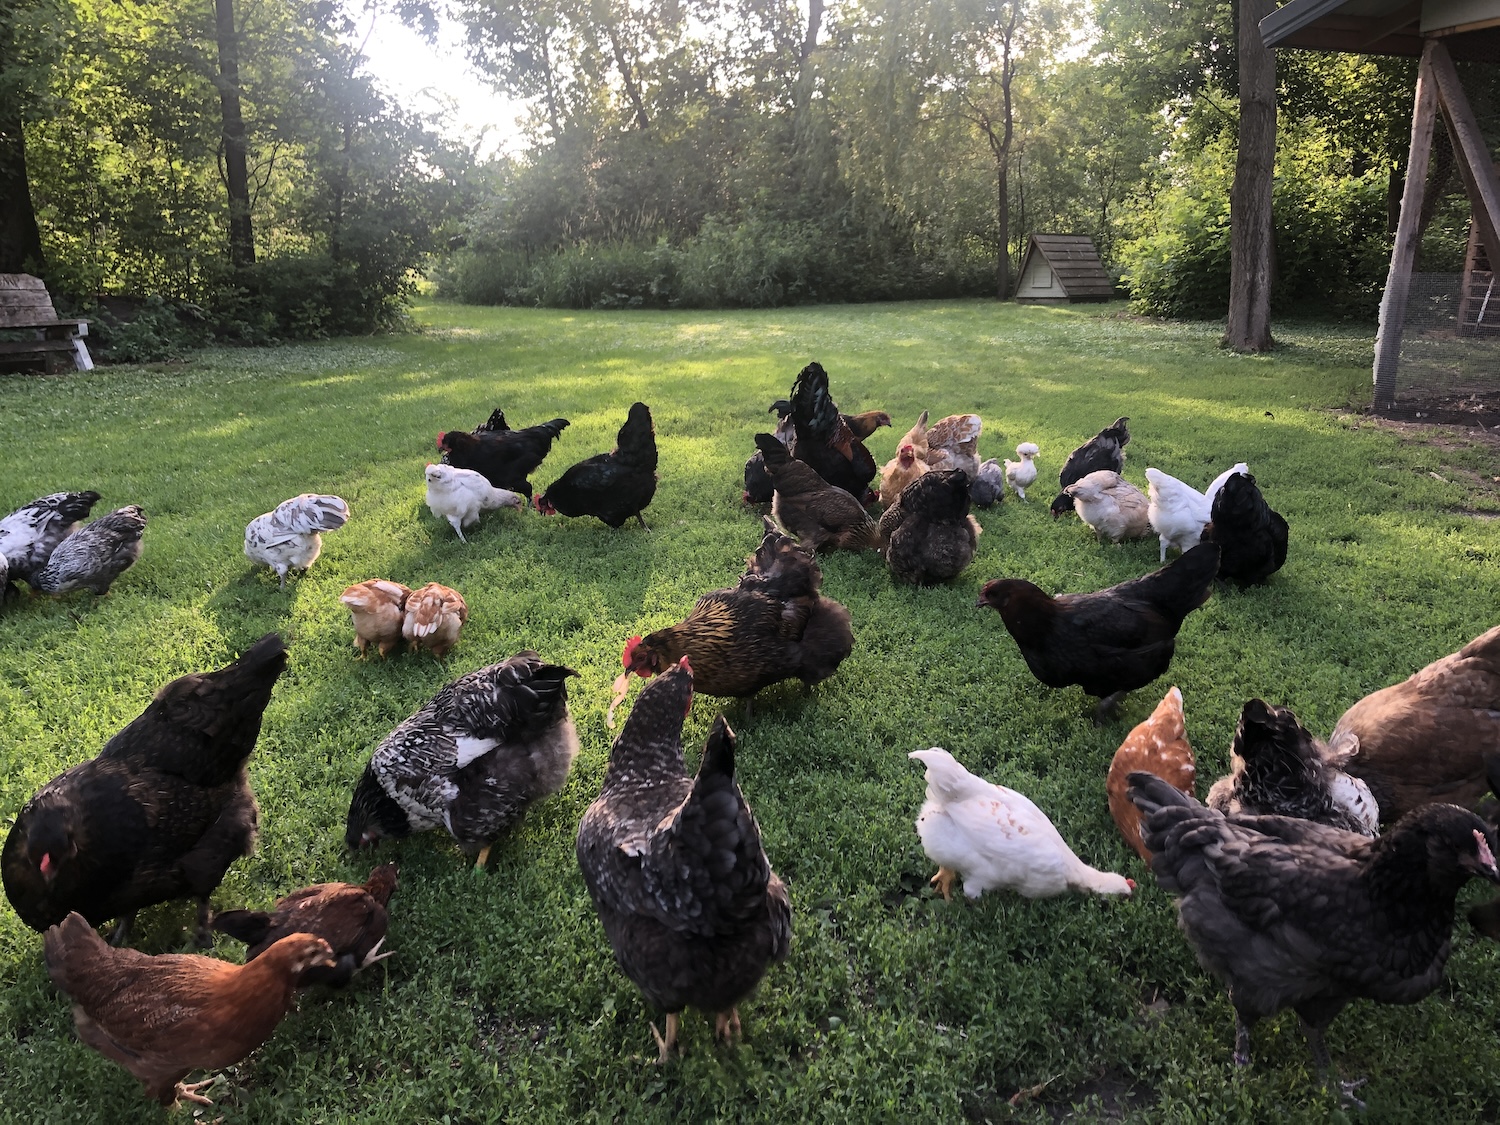 A variety of different chickens from different breeds all foraging outside at sunset